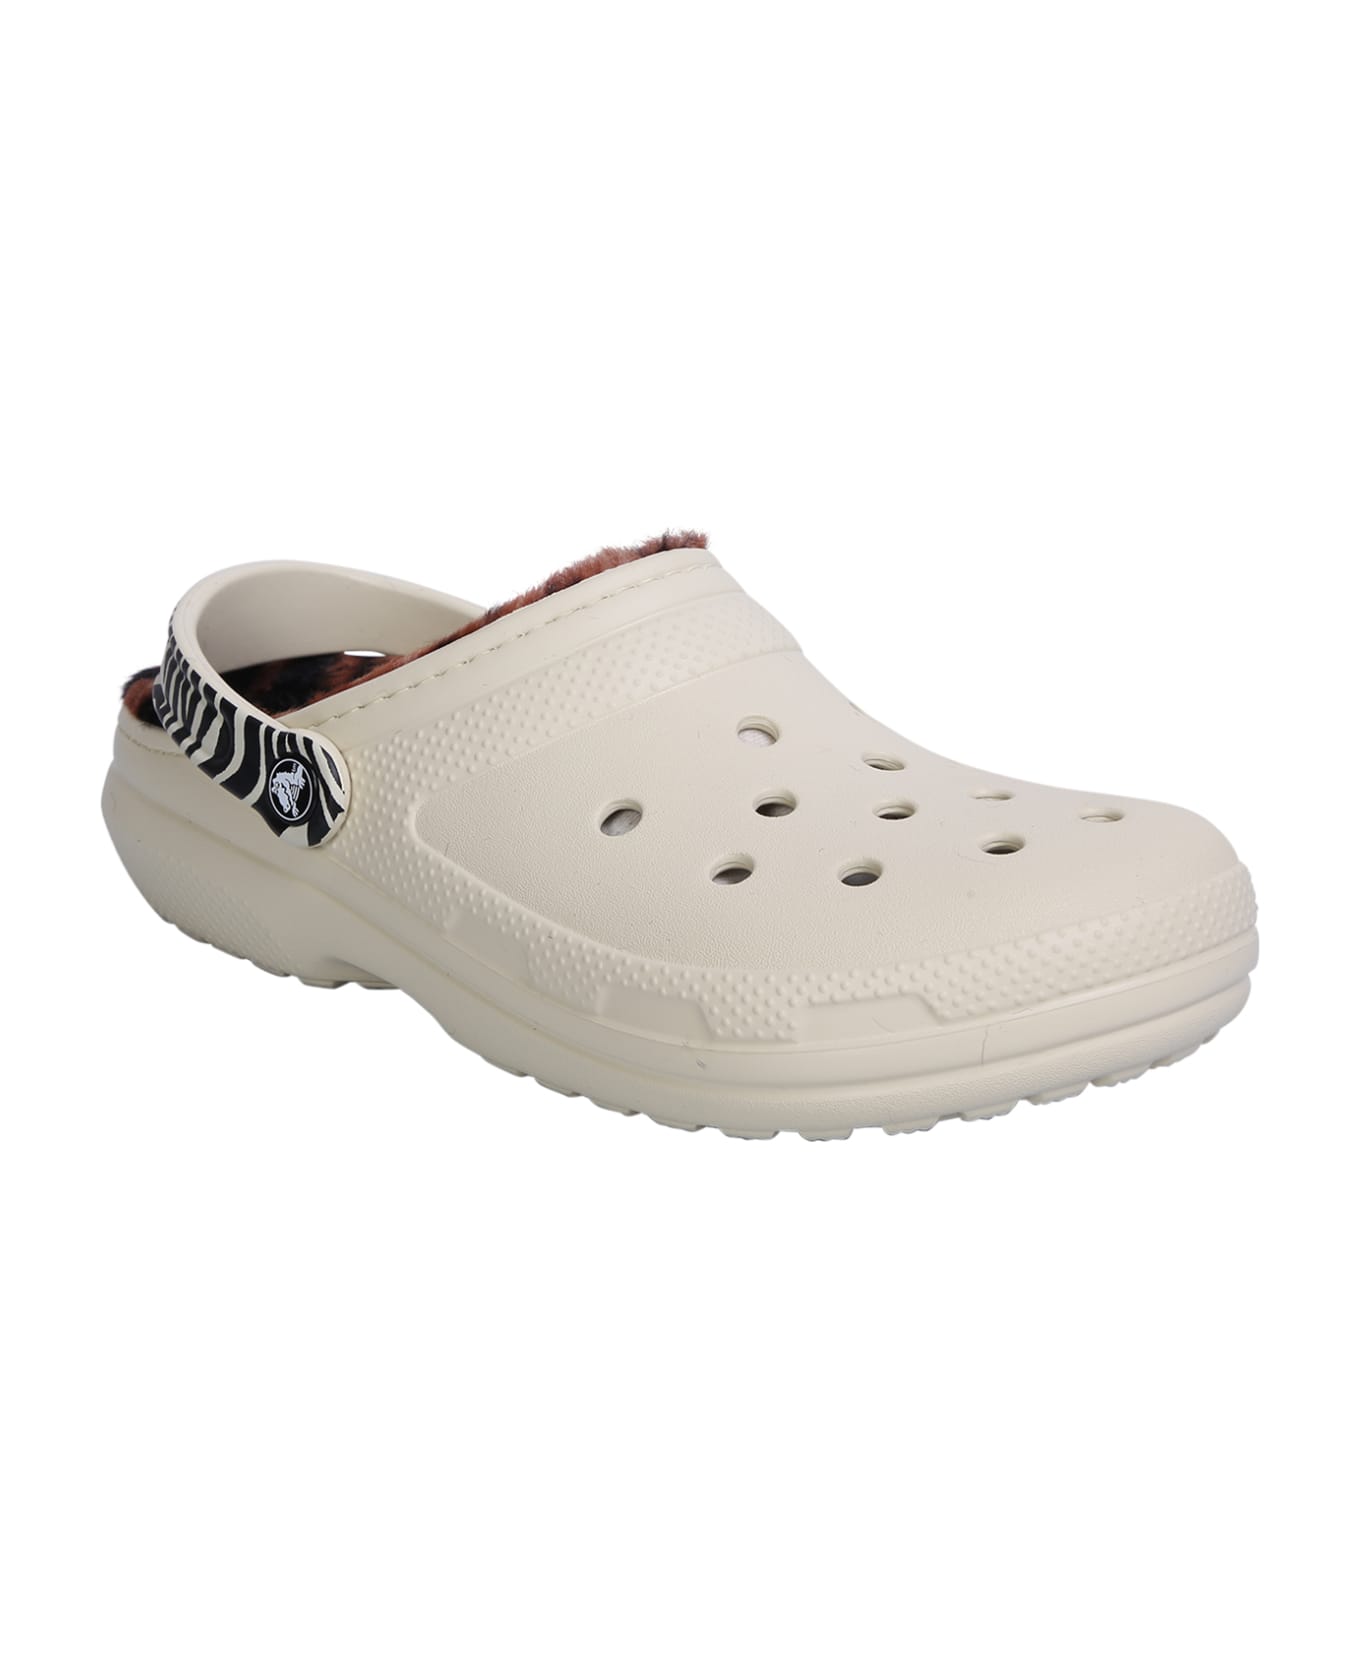 Crocs Lined Animal Clog Sandals In White - White